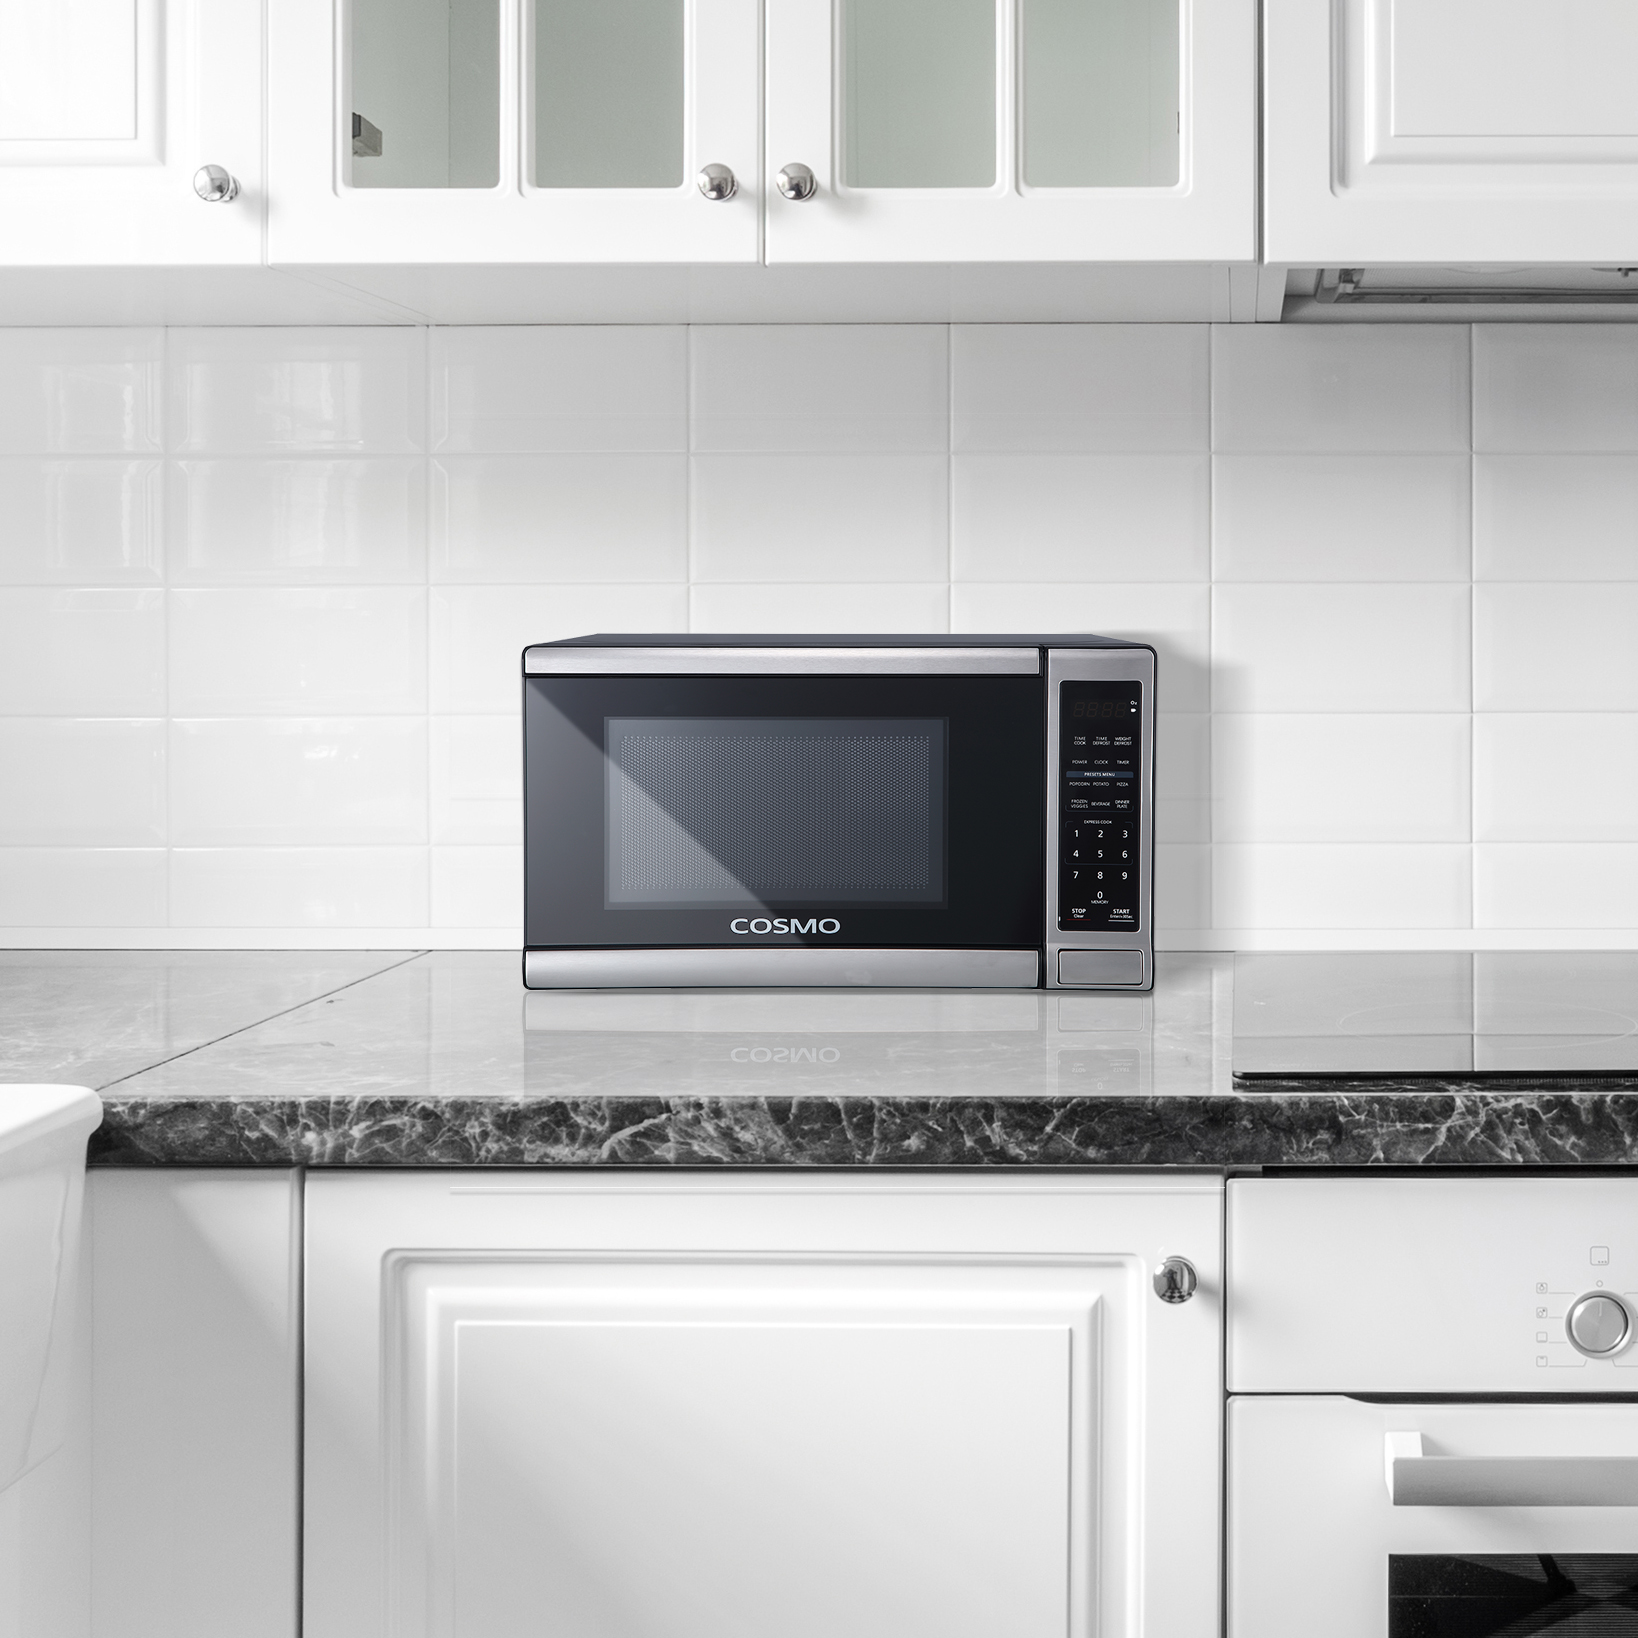 What to Look for in a Microwave